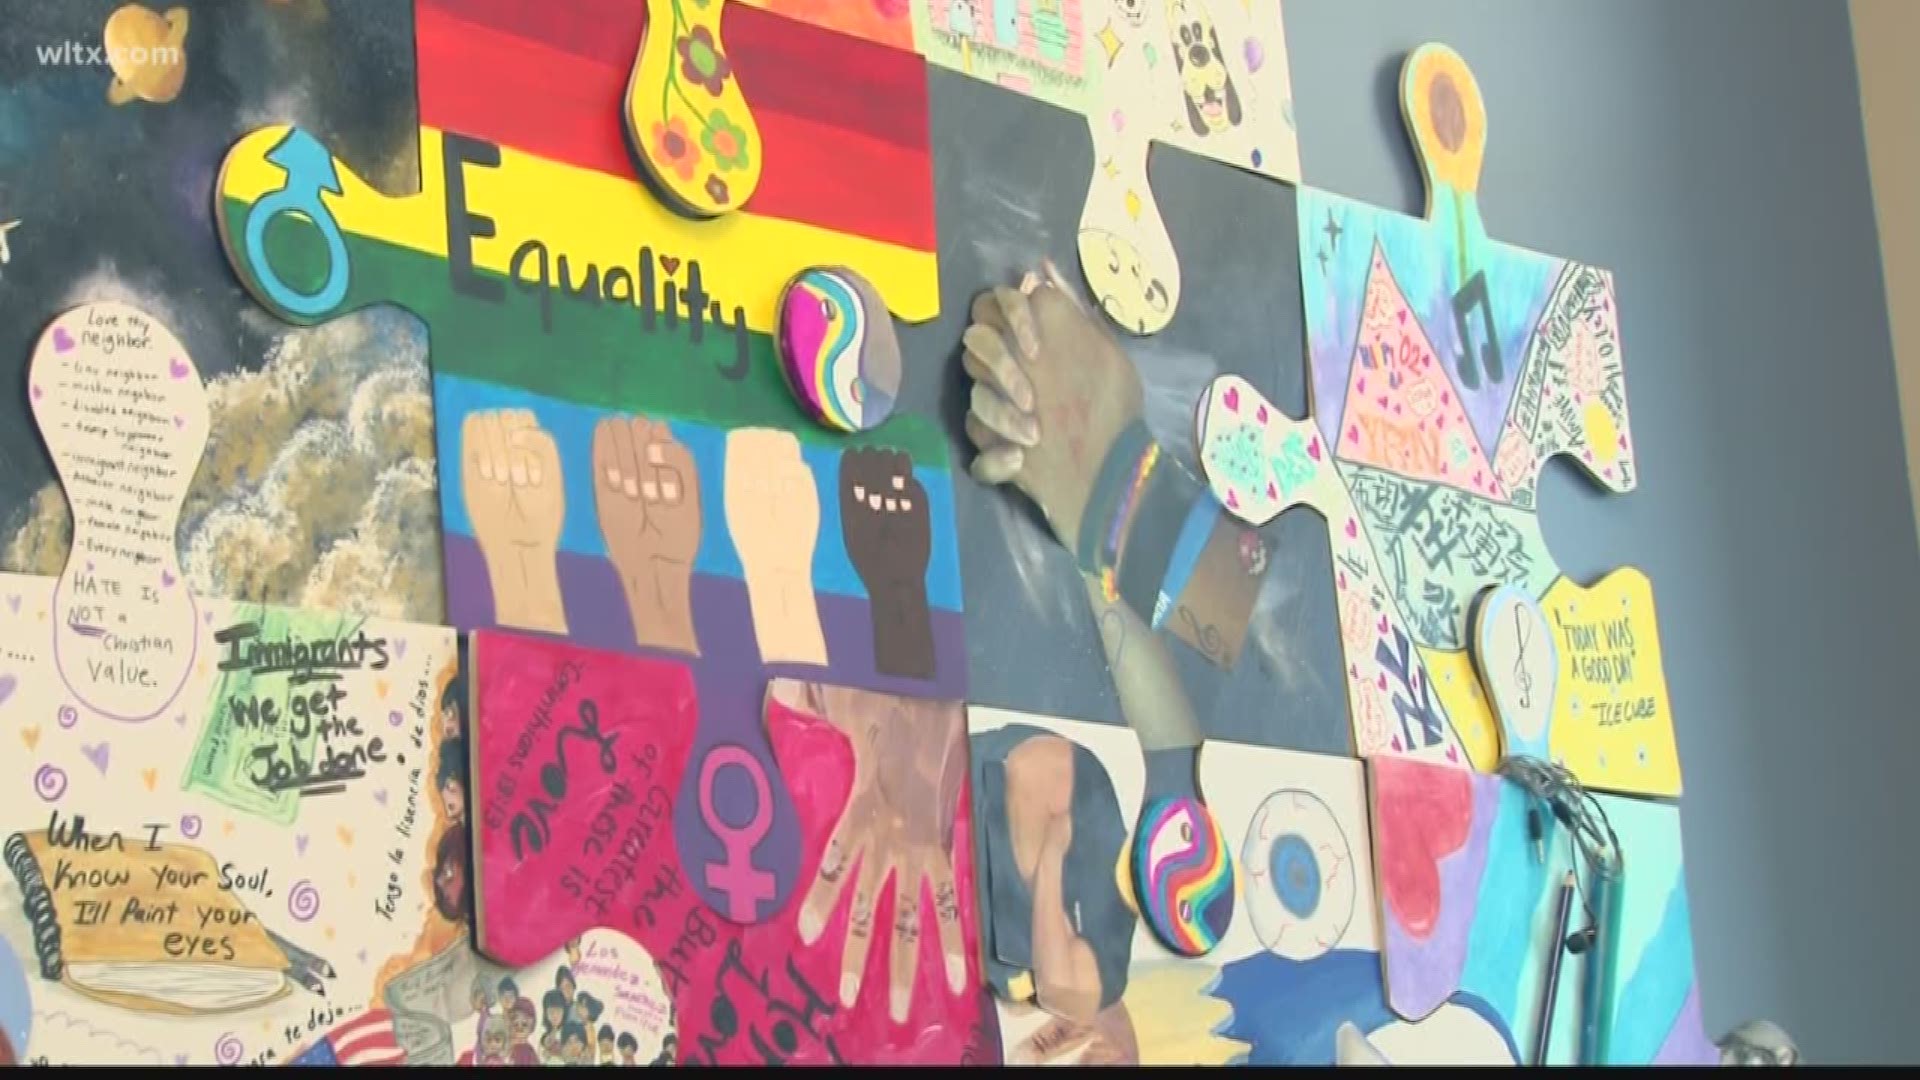 One teacher at Lugoff-Elgin High School in Camden found a way to bring out student’s feelings through their own self-expression.